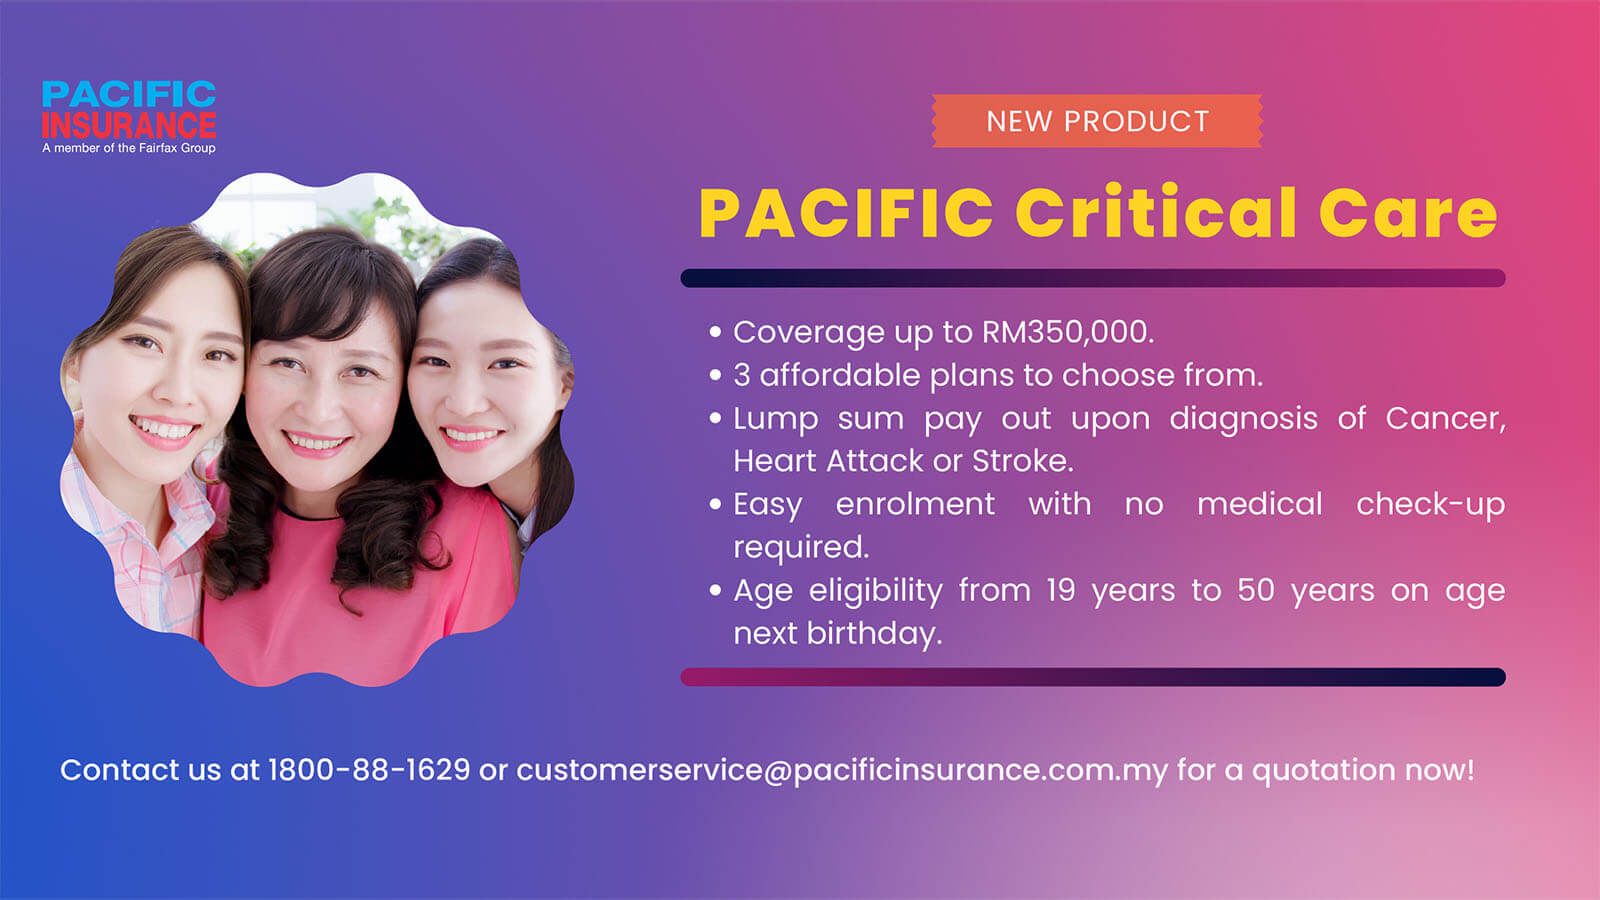 NEW PRODUCT PACIFIC Critical Care